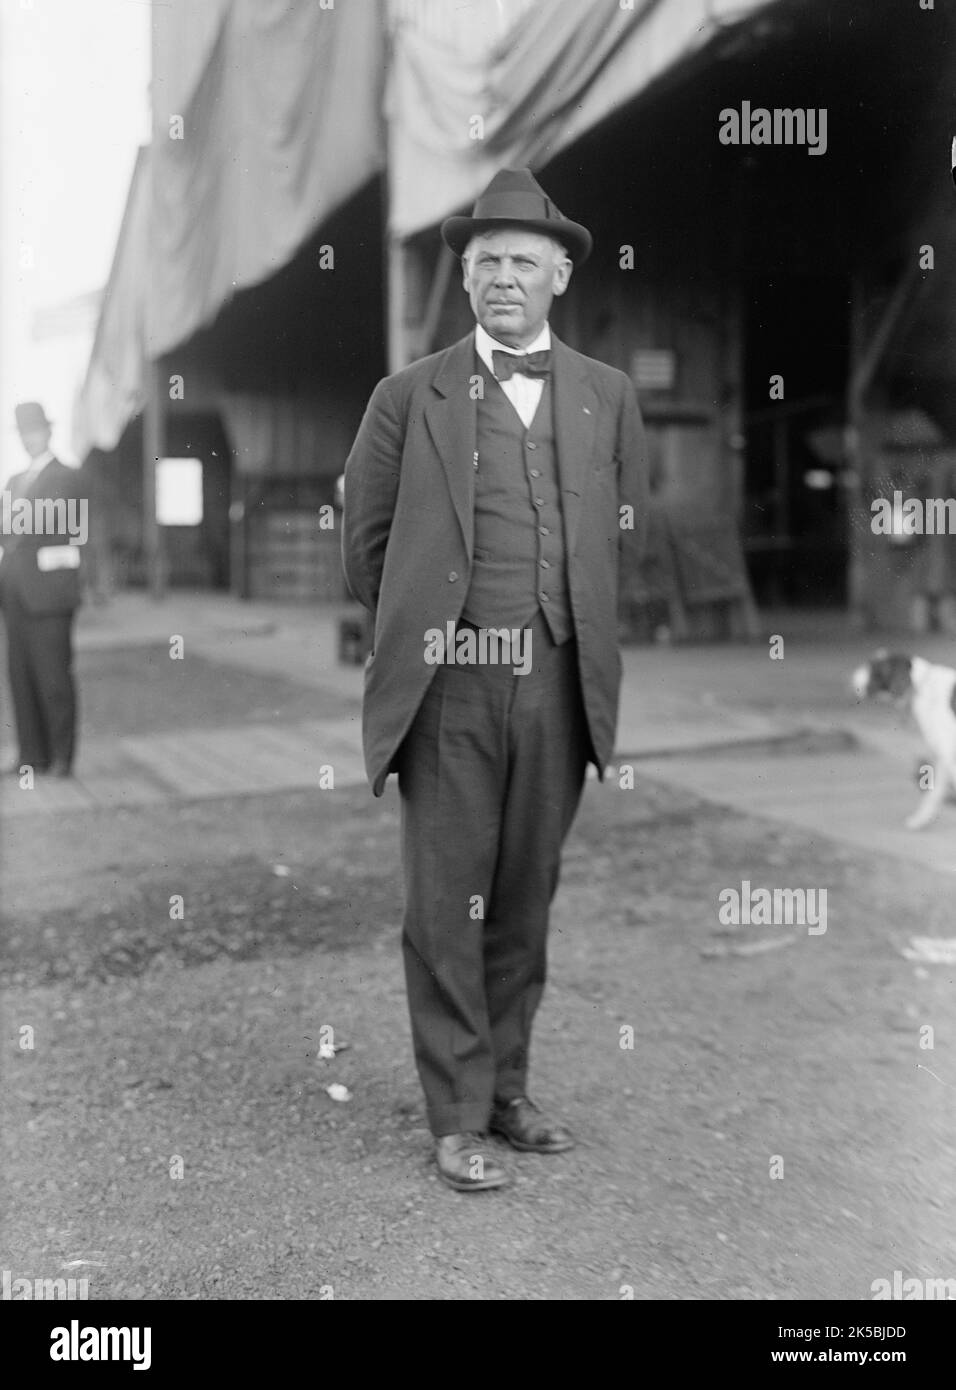 Balloons - Captain Thomas Scott Baldwin, N.A., Who Built Dirigible Balloon #1 Except The Engine, Which Was Made By Curtiss, 1914. Pioneer balloonist and U.S. Army major during World War I, the first American to descend from a balloon by parachute. Stock Photo